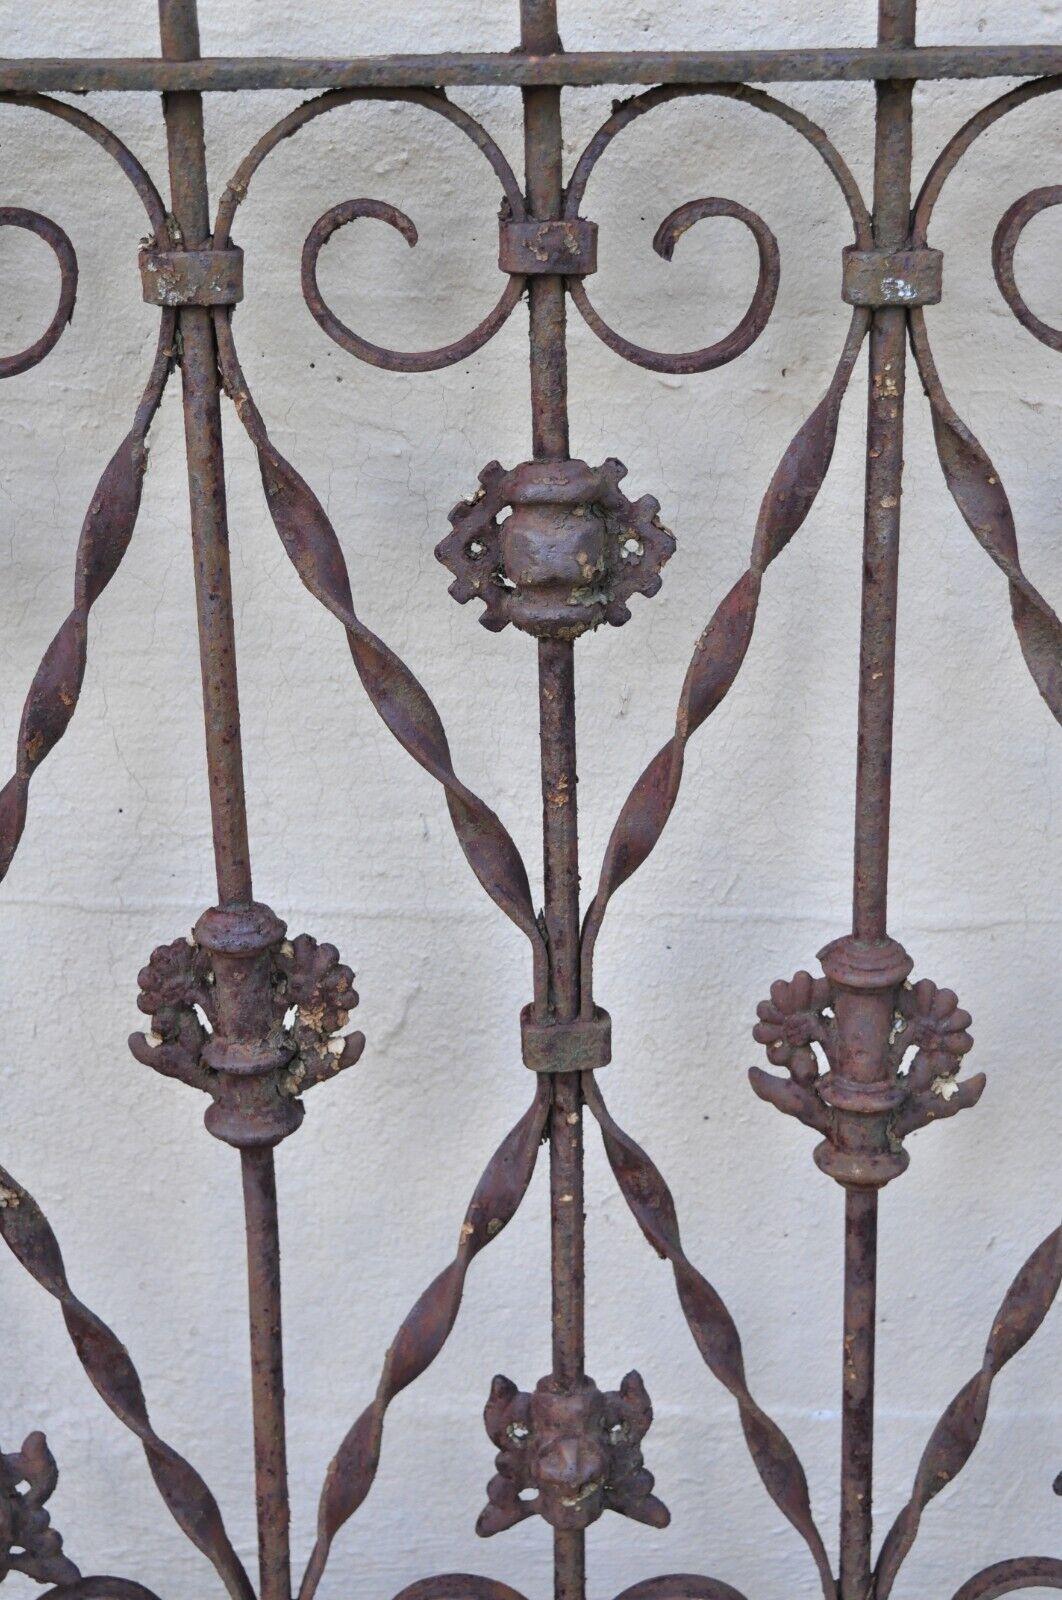 20th Century Antique Victorian Wrought Iron Ornate Gate Fence Architectural Element